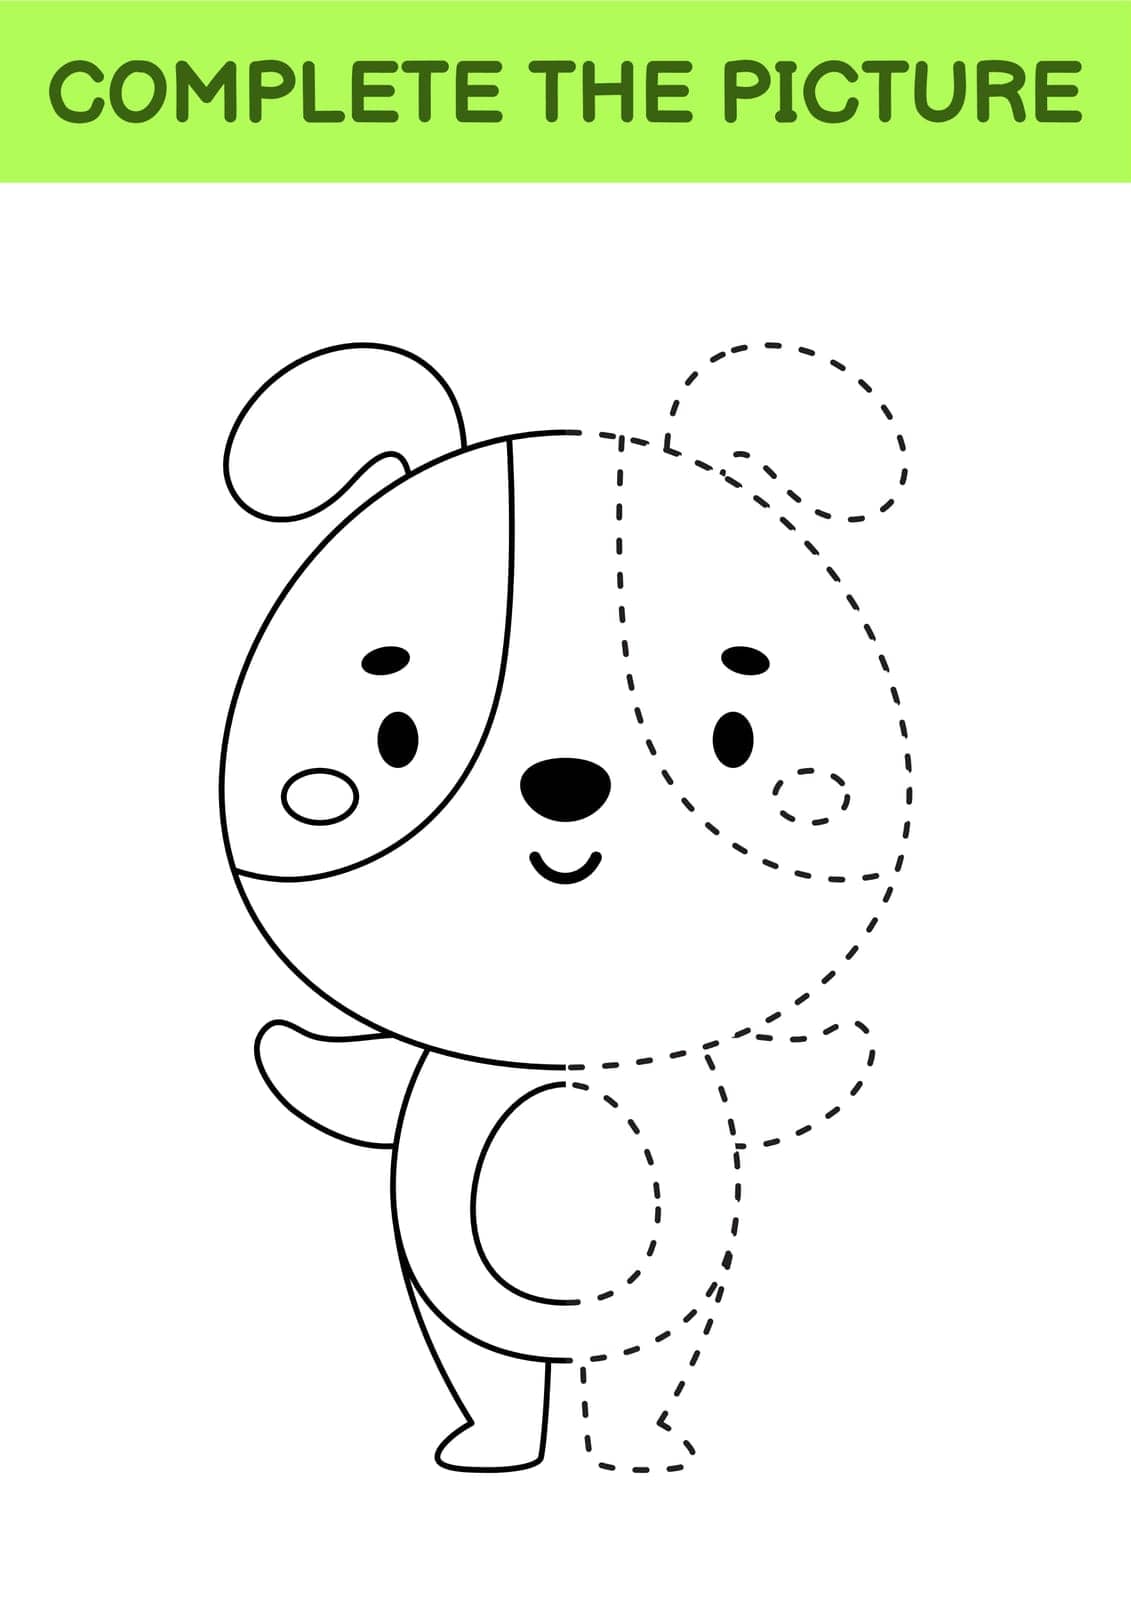 Complete drawn picture of cute dog. Coloring book. Dot copy game. Handwriting practice, drawing skills training. Education developing printable worksheet. Activity page. Vector illustration